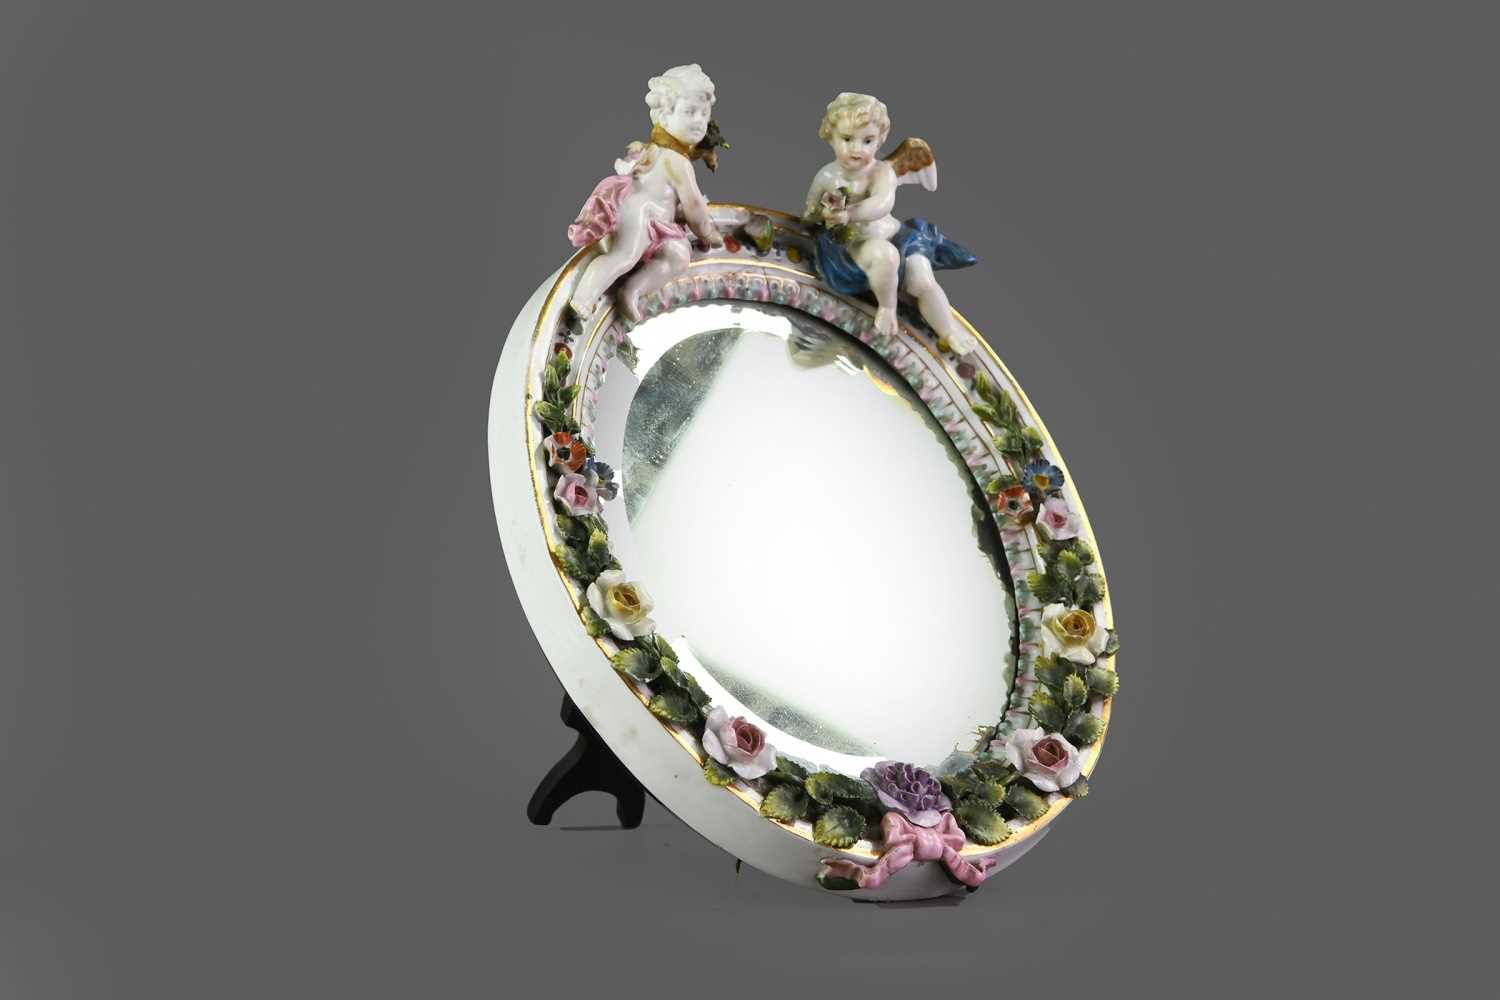 Lot 118 - A LATE 19TH CENTURY CONTINENTAL PORCELAIN MIRROR